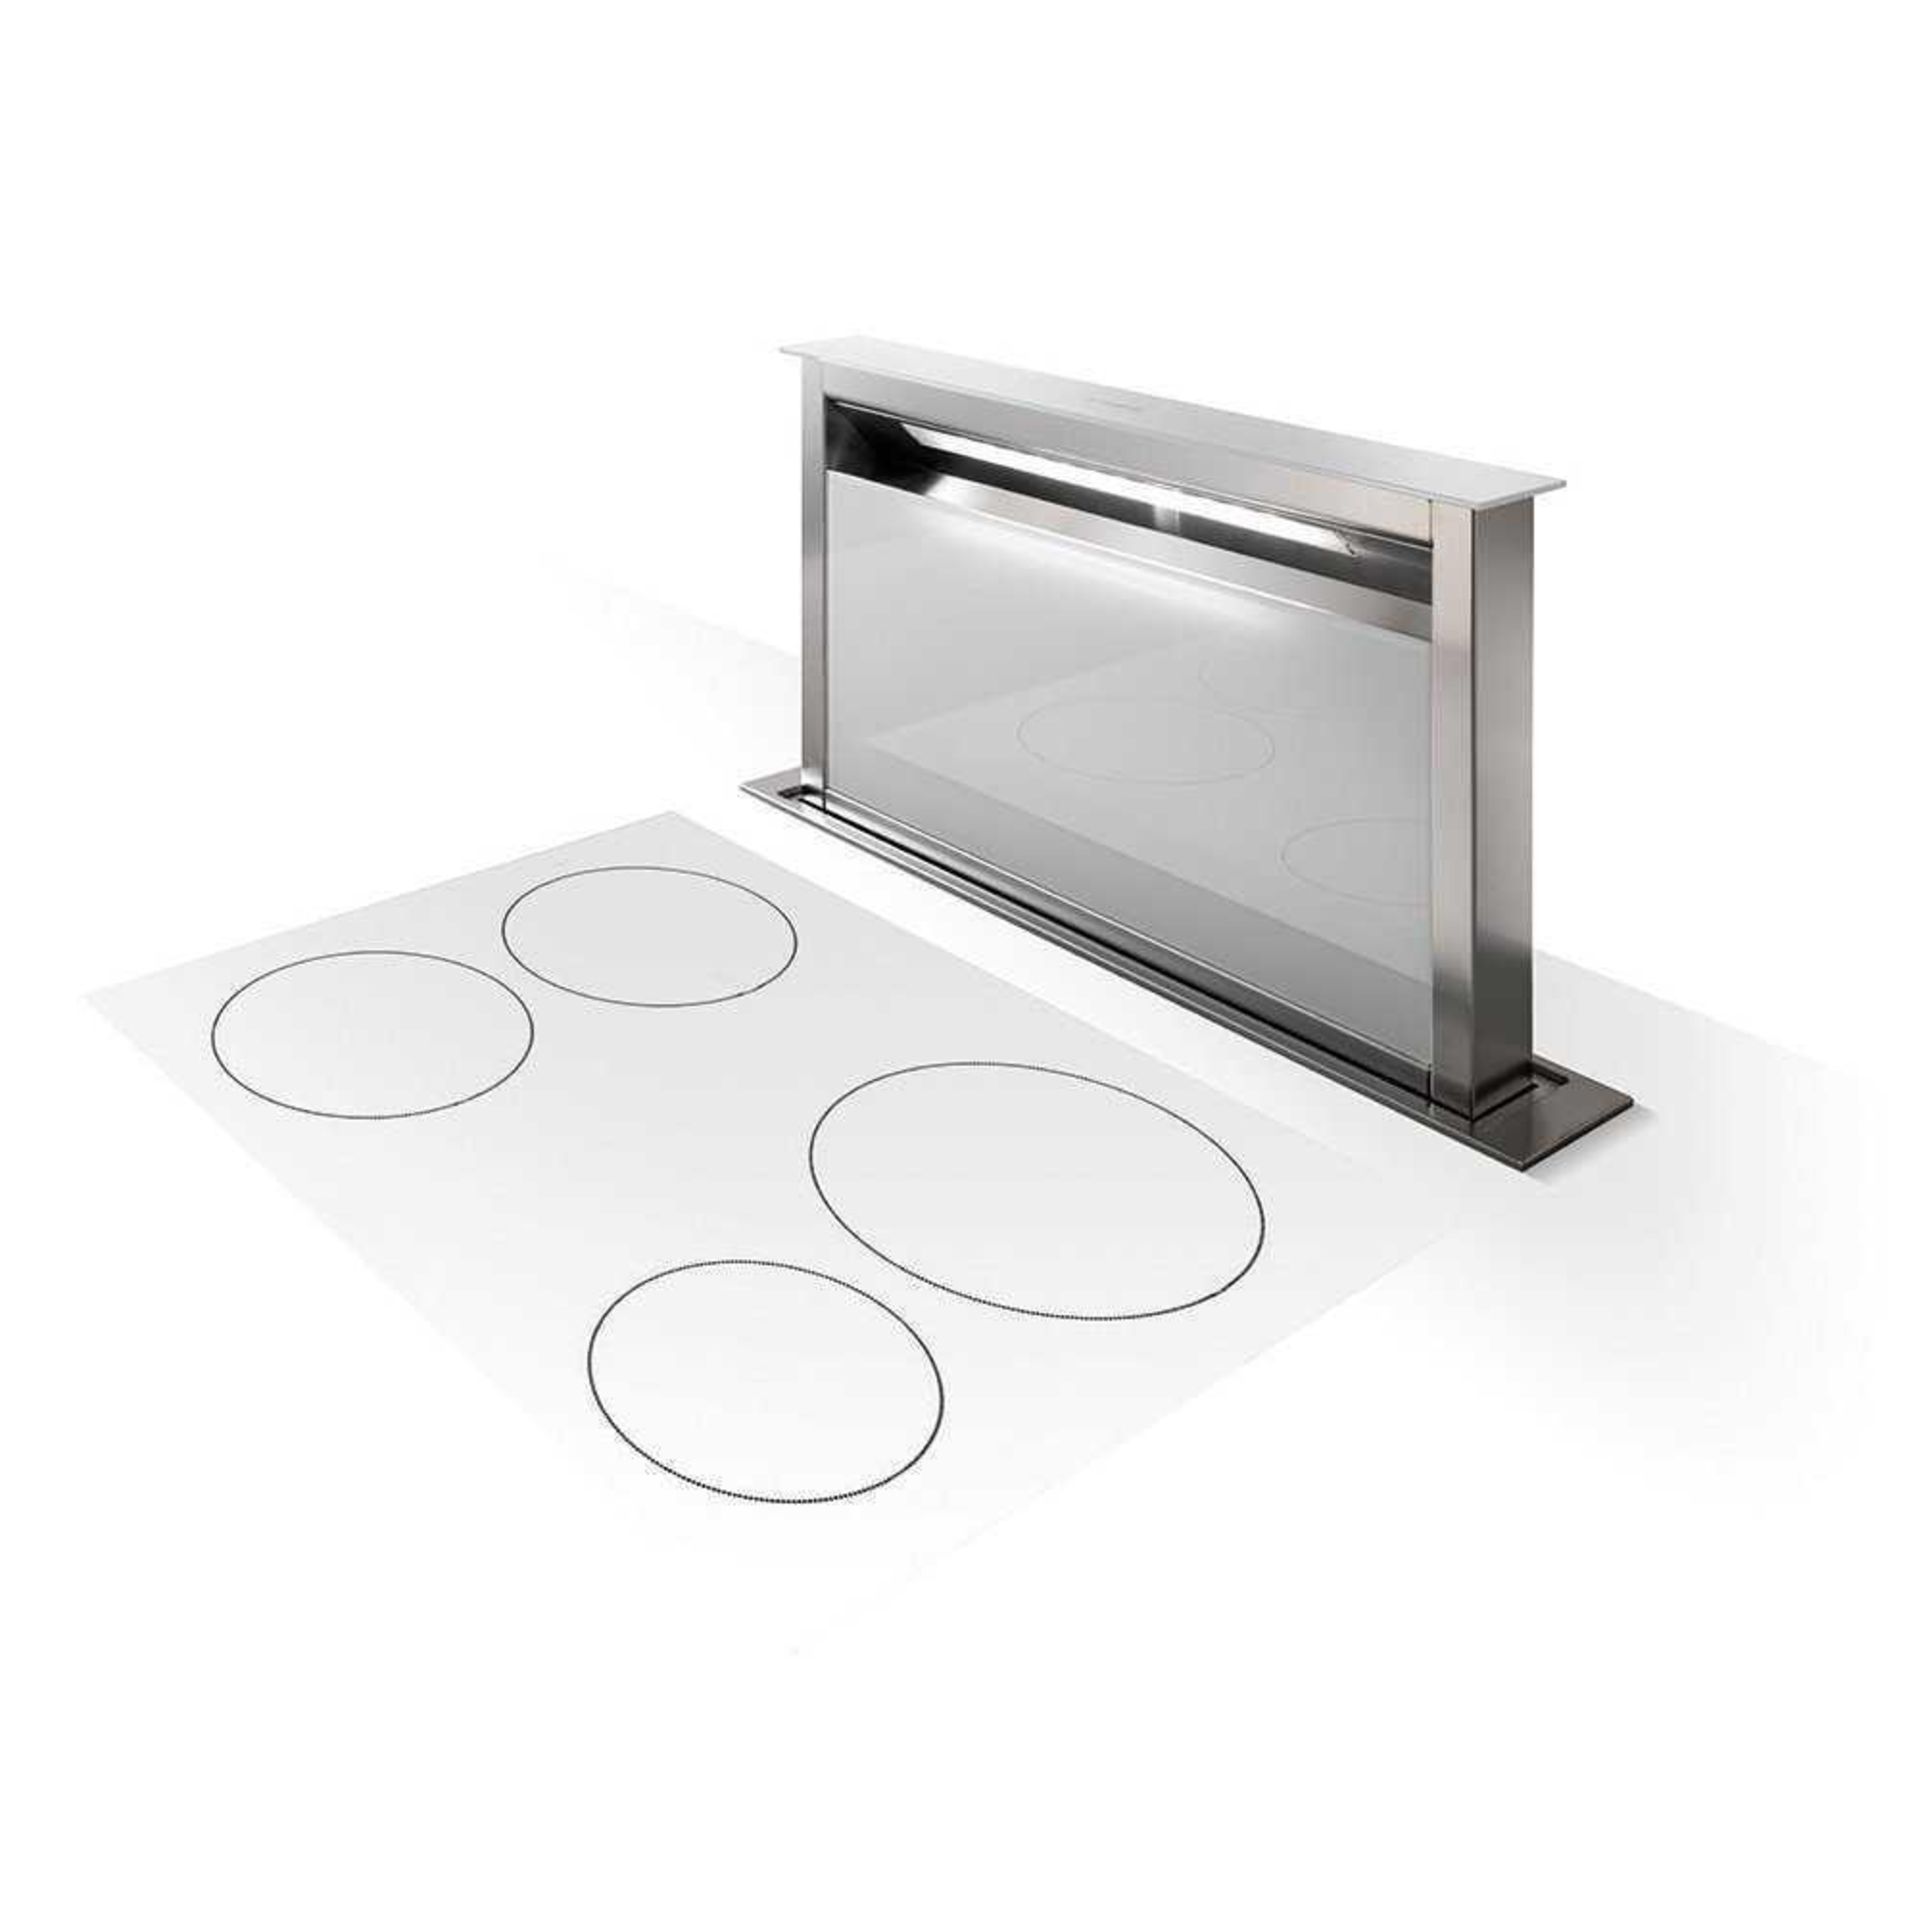 (Sk)RRP £1700 Lot Containing Apelson Down -Draft Hood With An Extractor - White (Boxed)